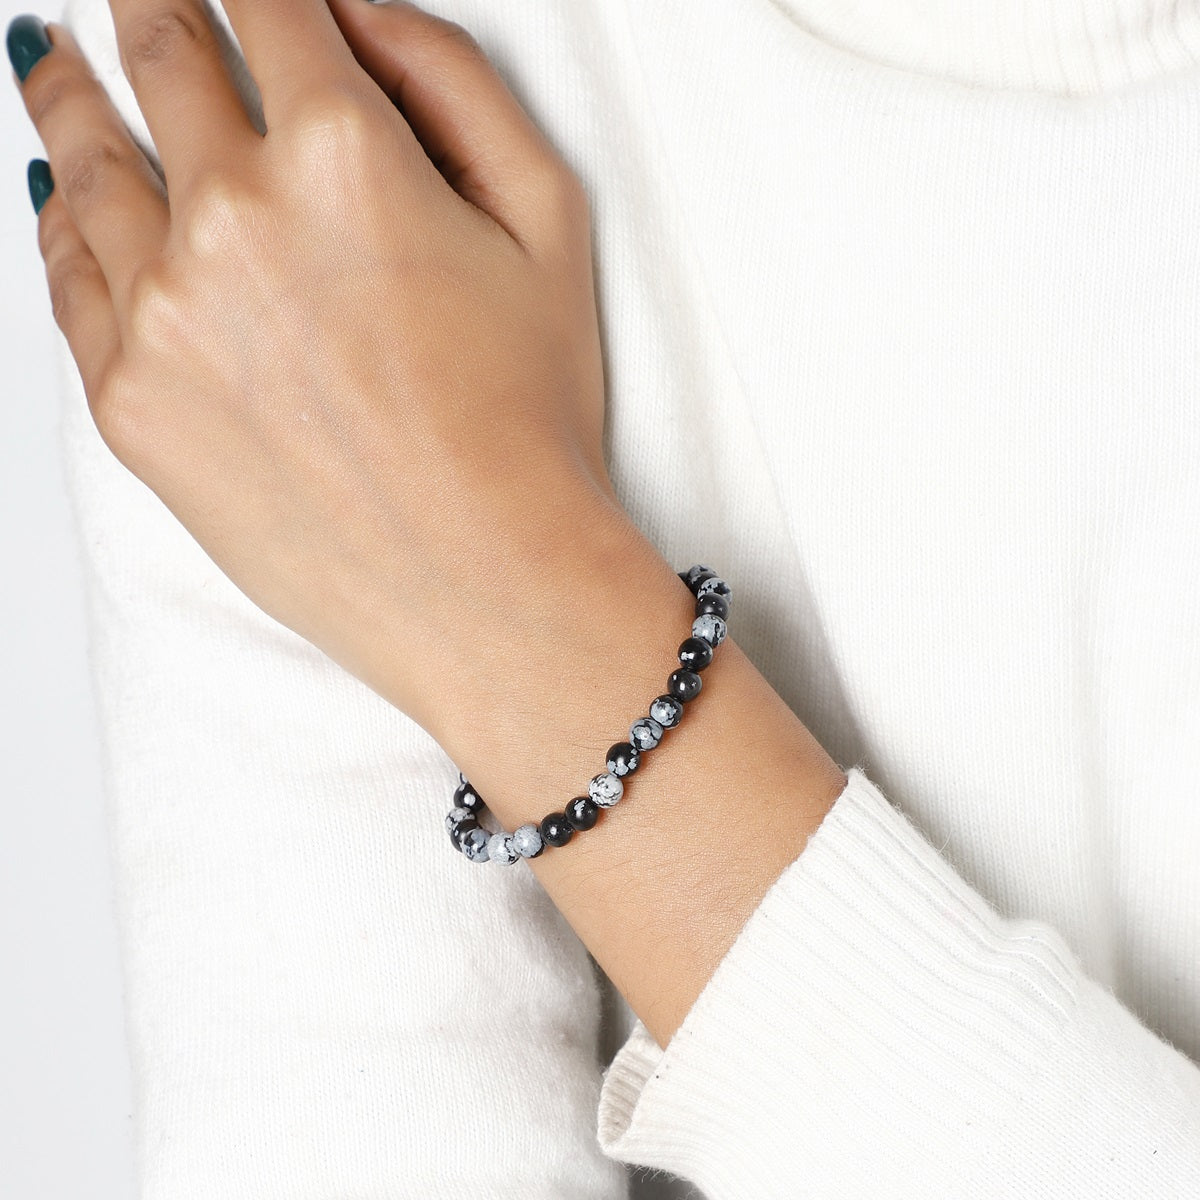 A lifestyle image featuring the Snowflake Obsidian Bracelet being worn, demonstrating its seamless integration into everyday fashion with a touch of grounding energy